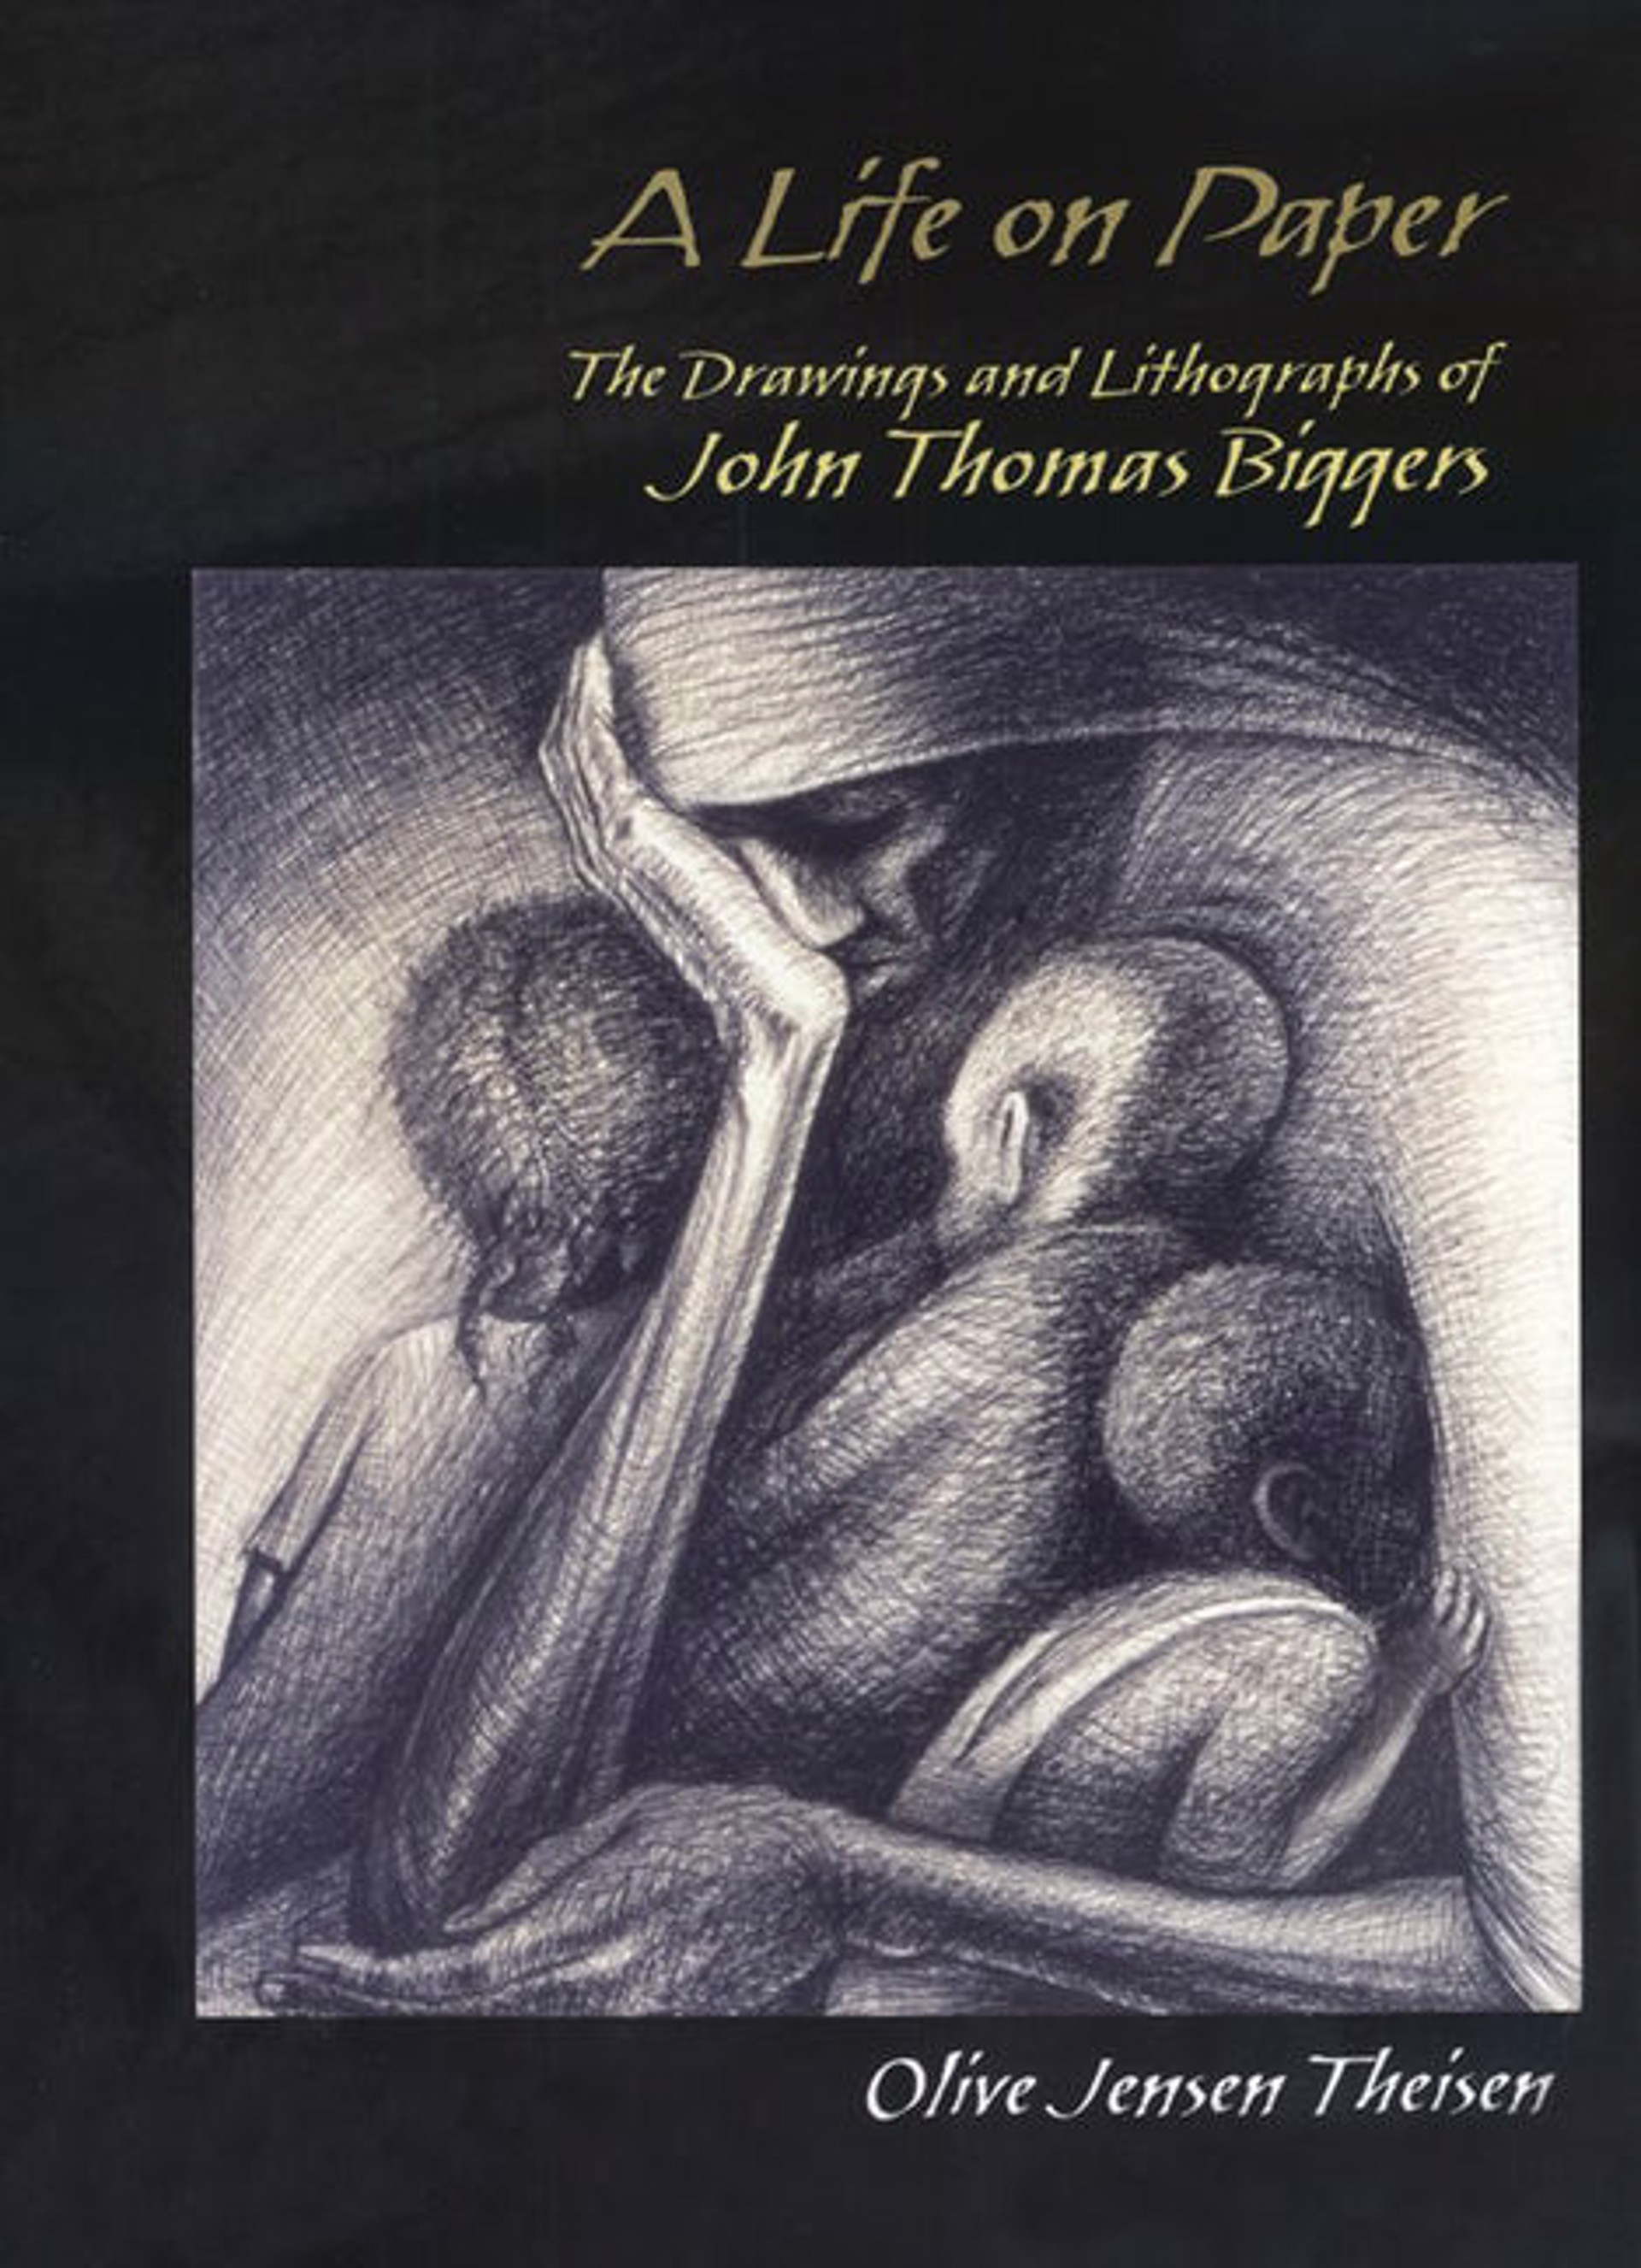 A Life on Paper: The Drawings and Lithographs of John Thomas Biggers by Publications